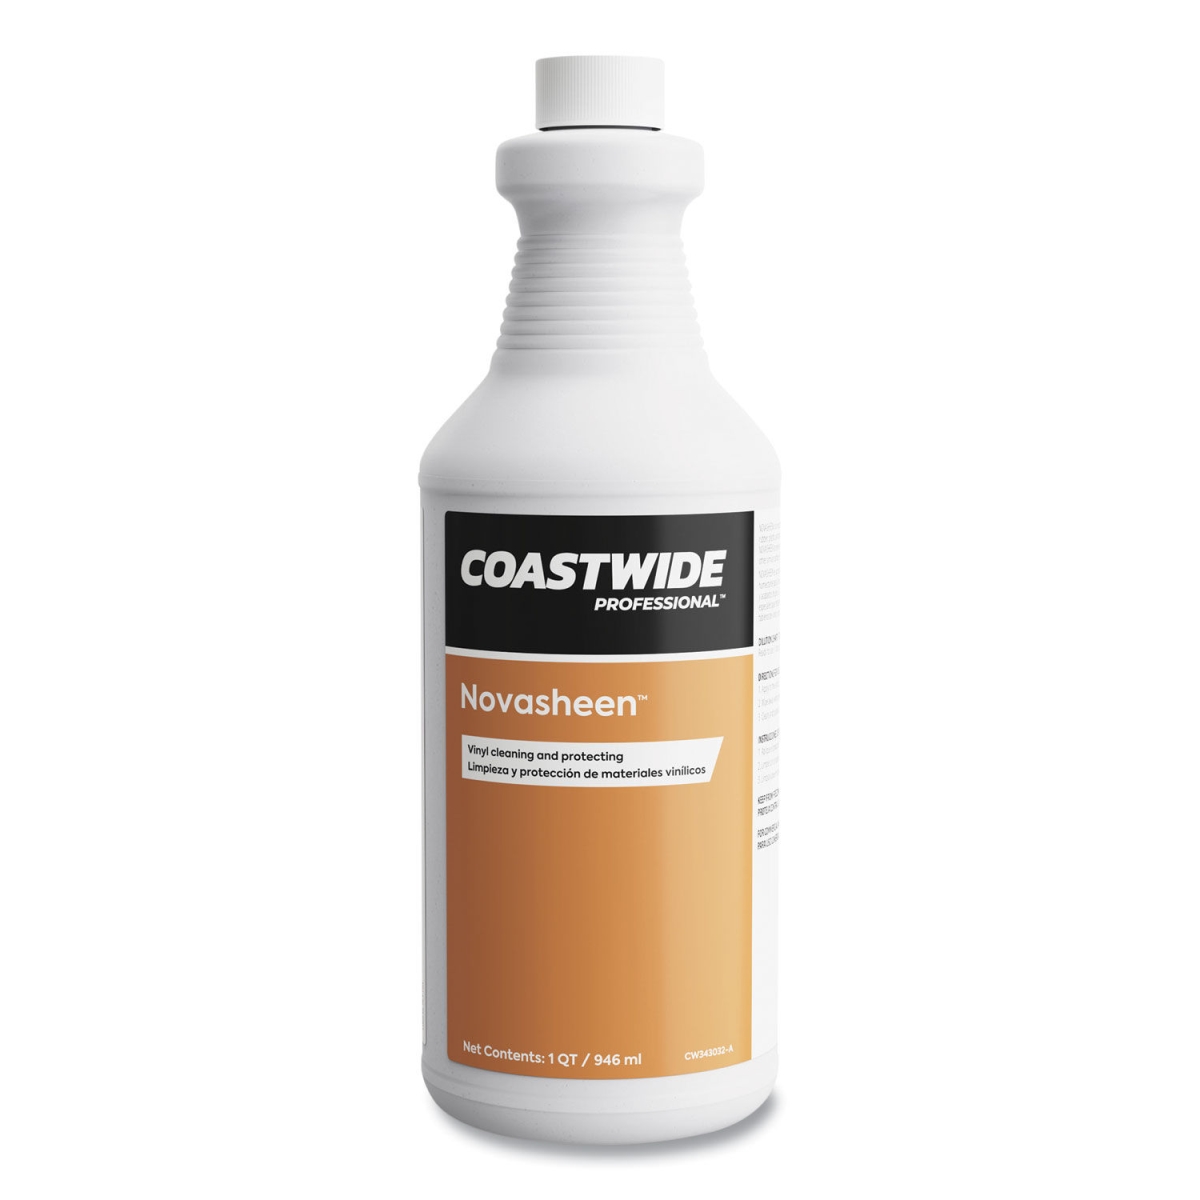 Picture of Coastwide Professional CW343032-A 0.95 Liter Floral Scent Novasheen Furniture & Wood Polish - 6 per Case